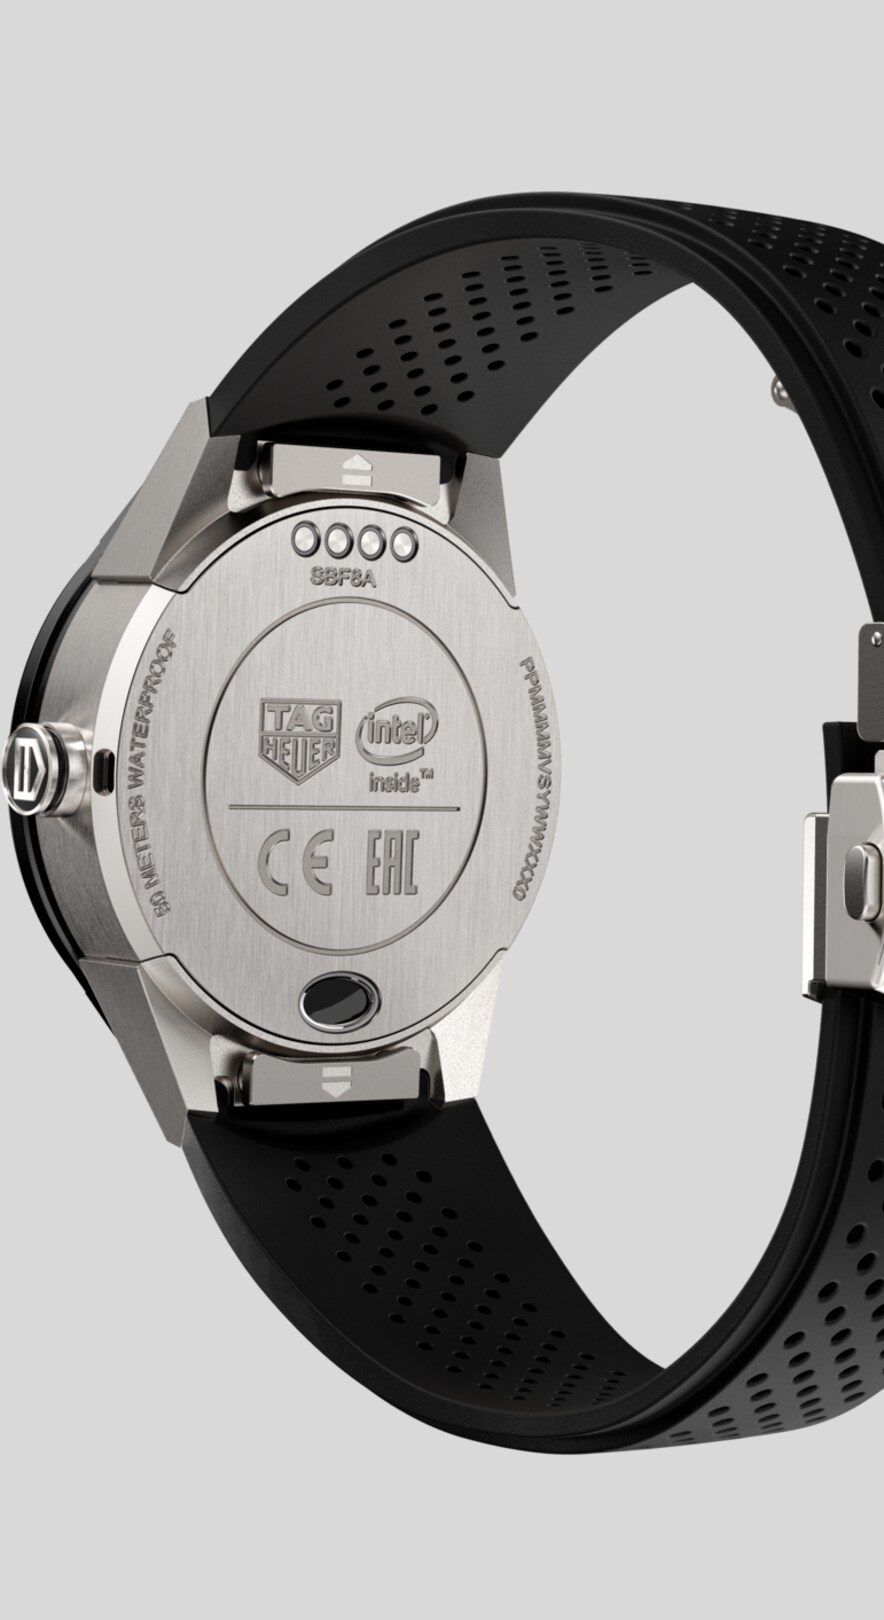 Reloj inteligente TAG Heuer Connected SBF8A8001.11FT6076